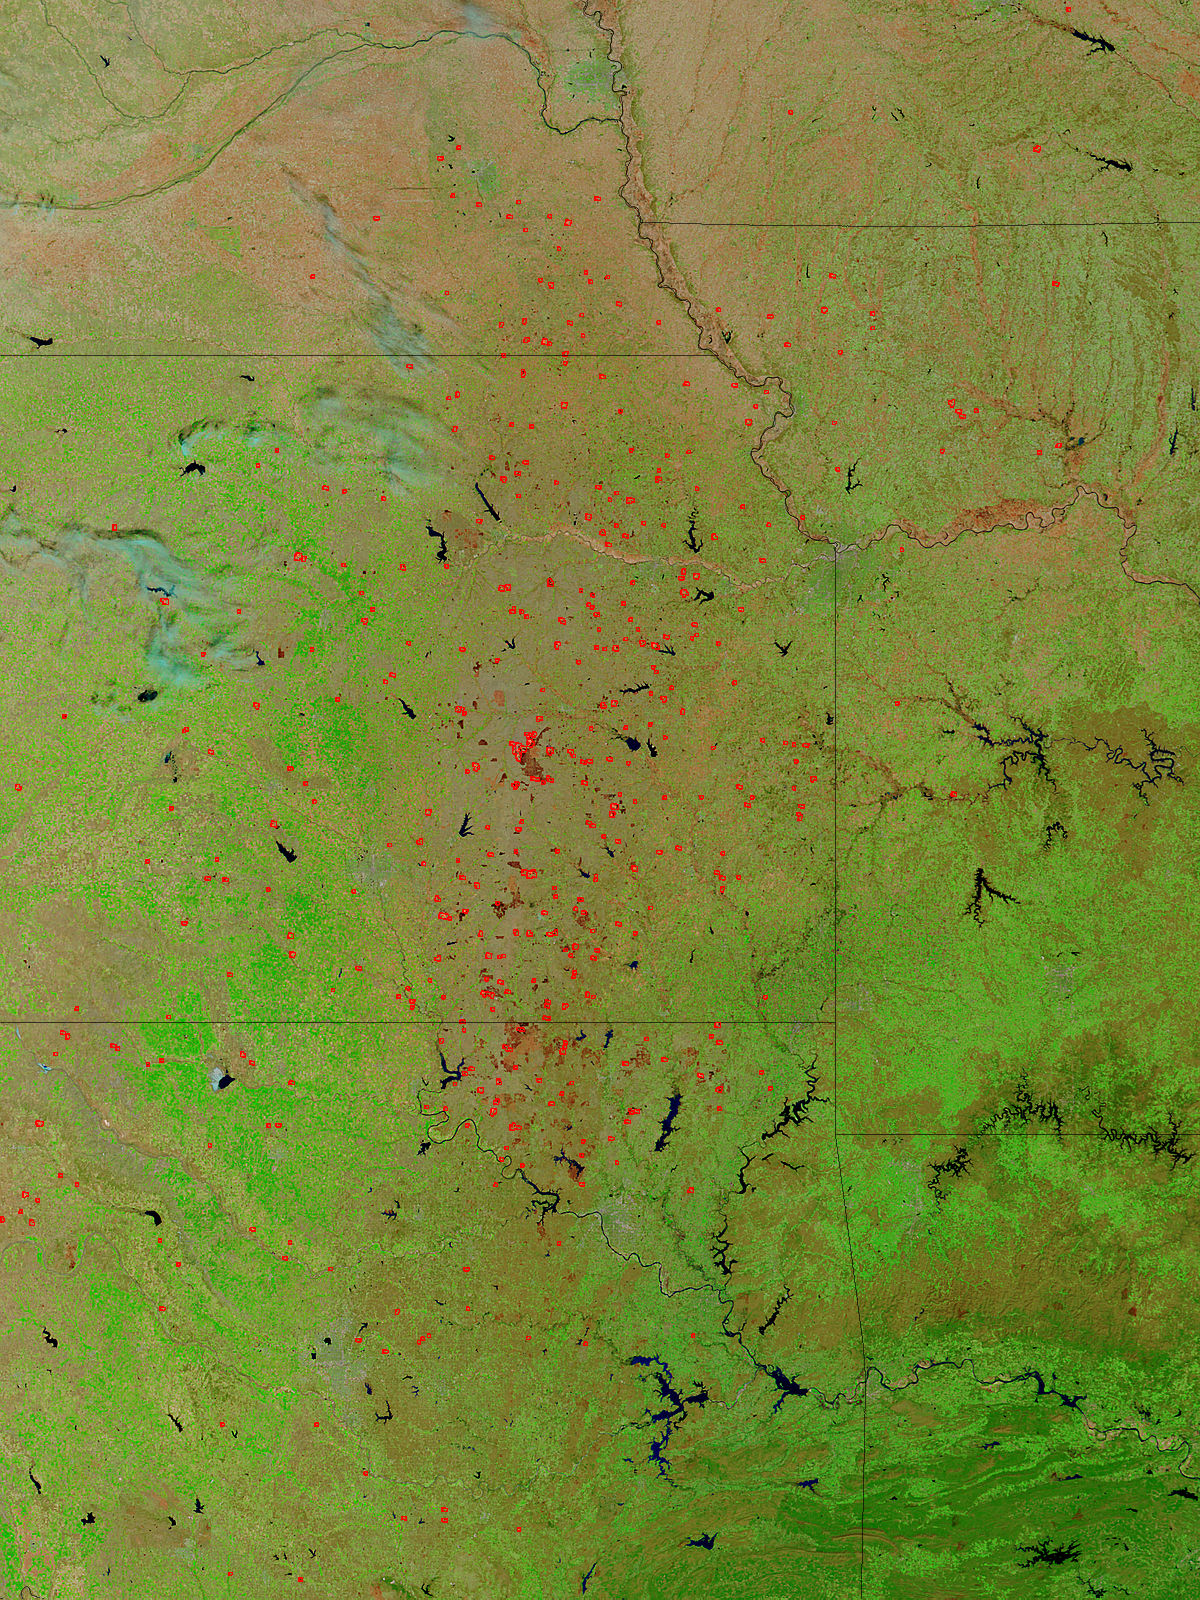 Fires and burn scars in central United States - related image preview